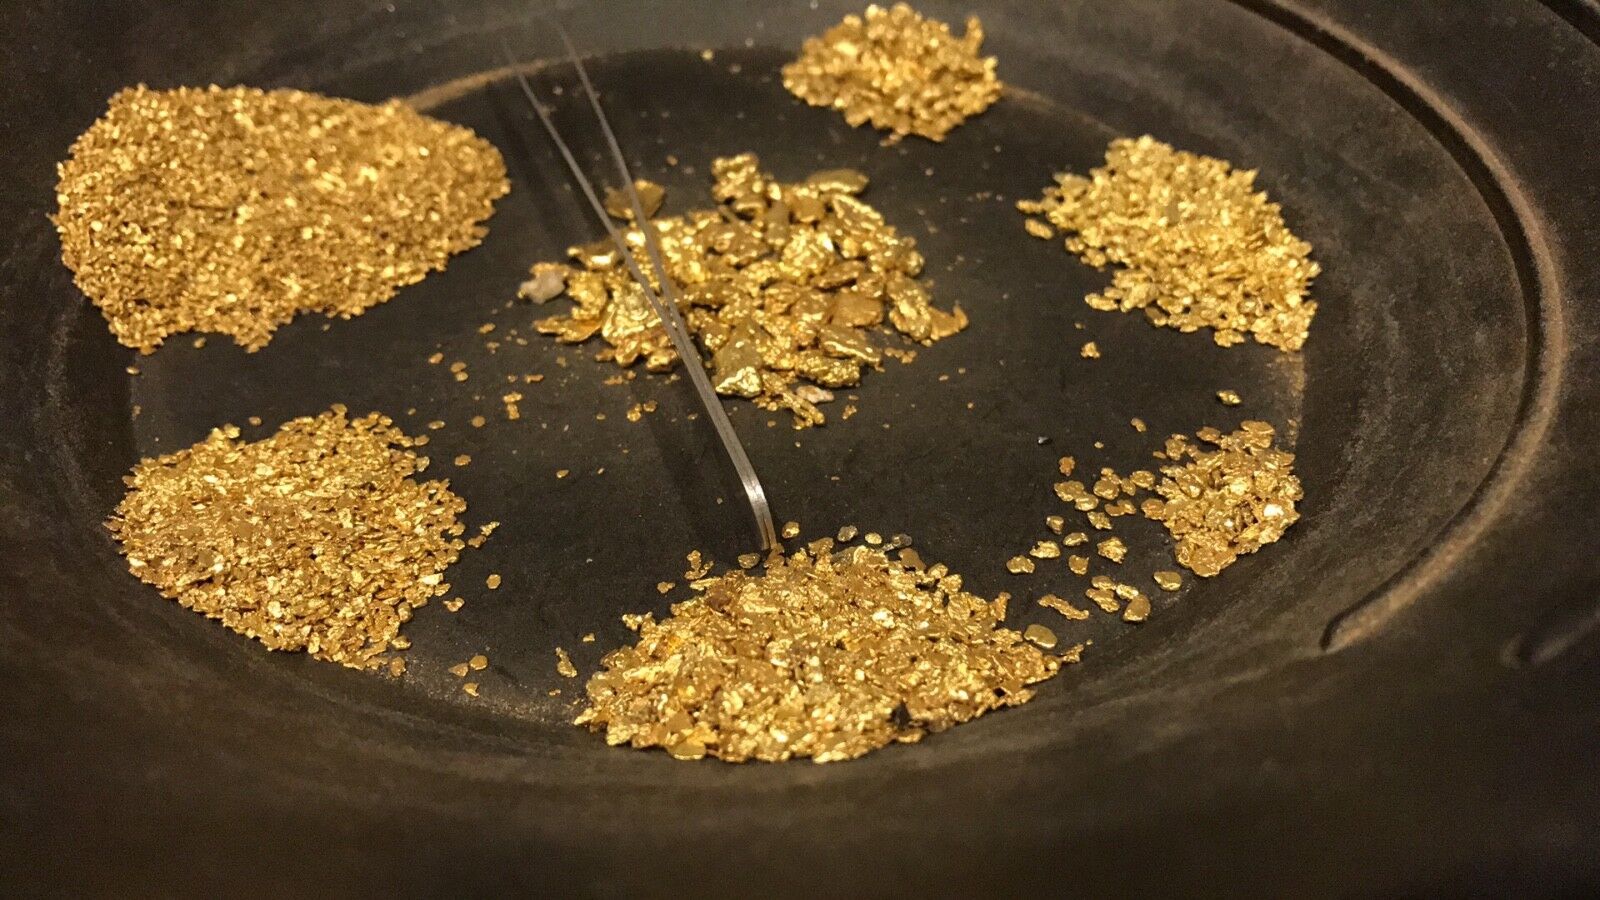 2 Lb NUGGET RESERVE ™ Gold Paydirt Guaranteed unsearched + added Gold & Nugget